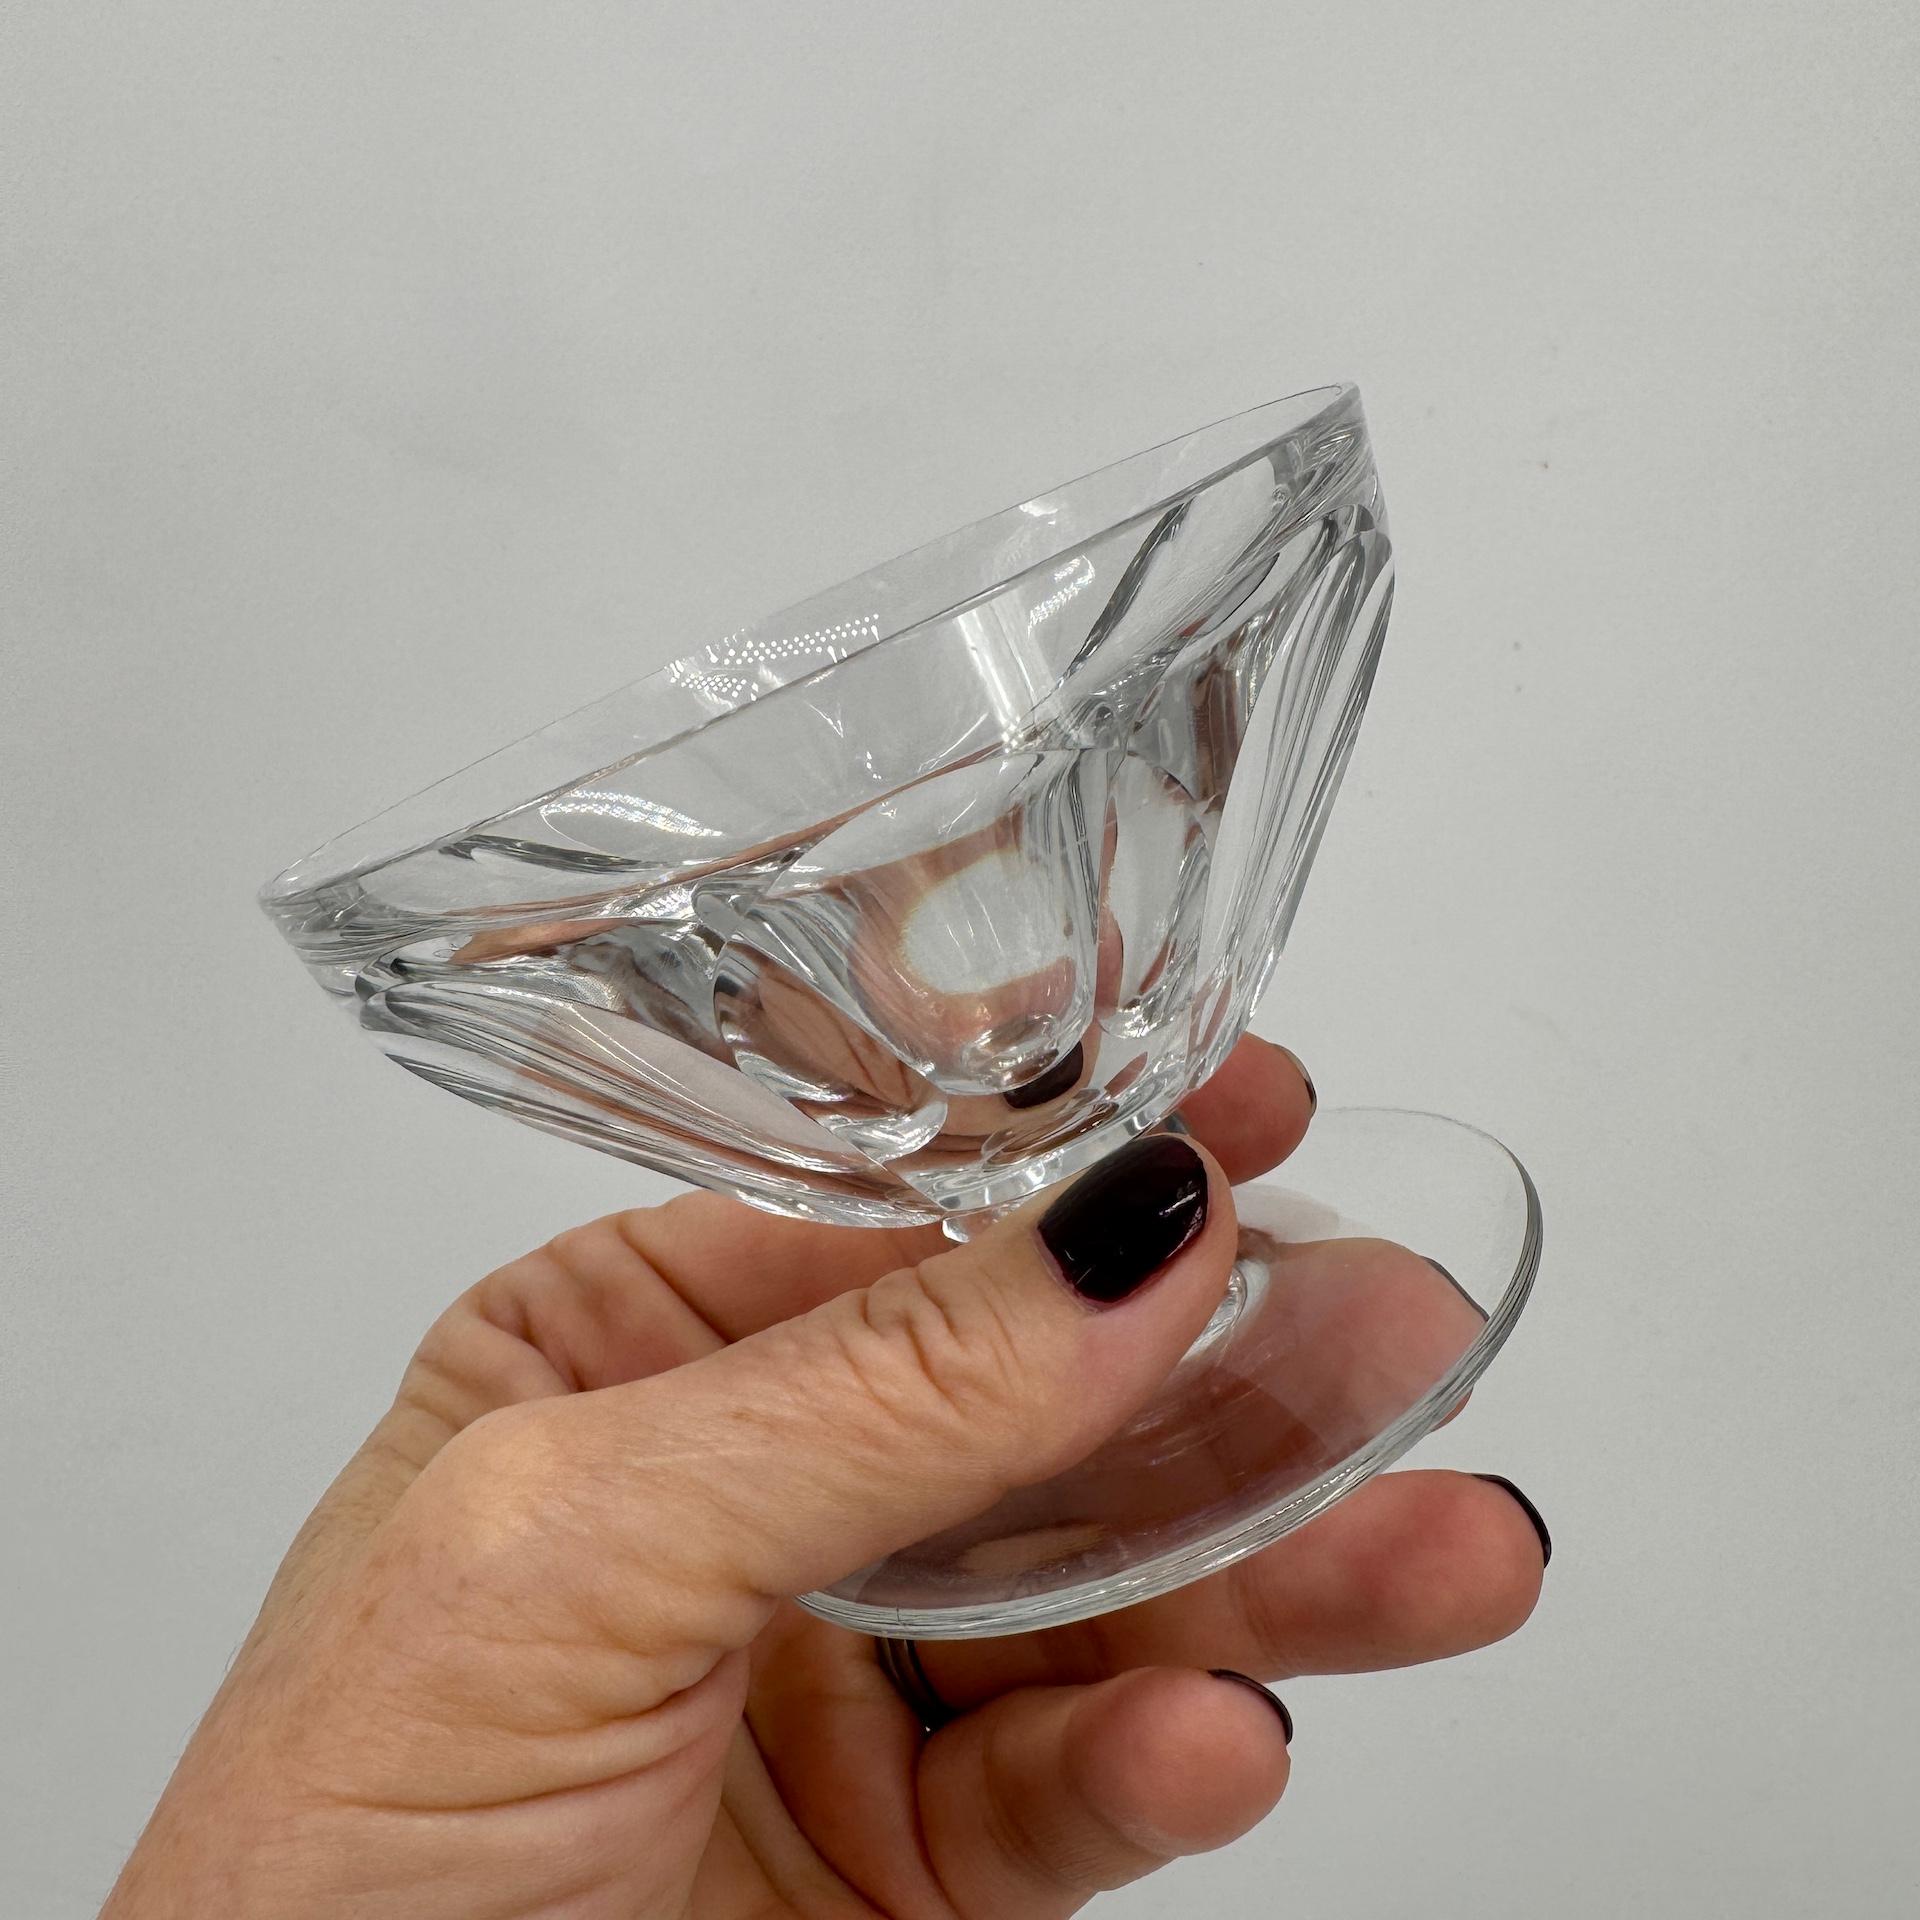 8 Baccarat Crystal Champagne or Cocktail Glasses, Talleyrand Model, Art Deco Era For Sale 5